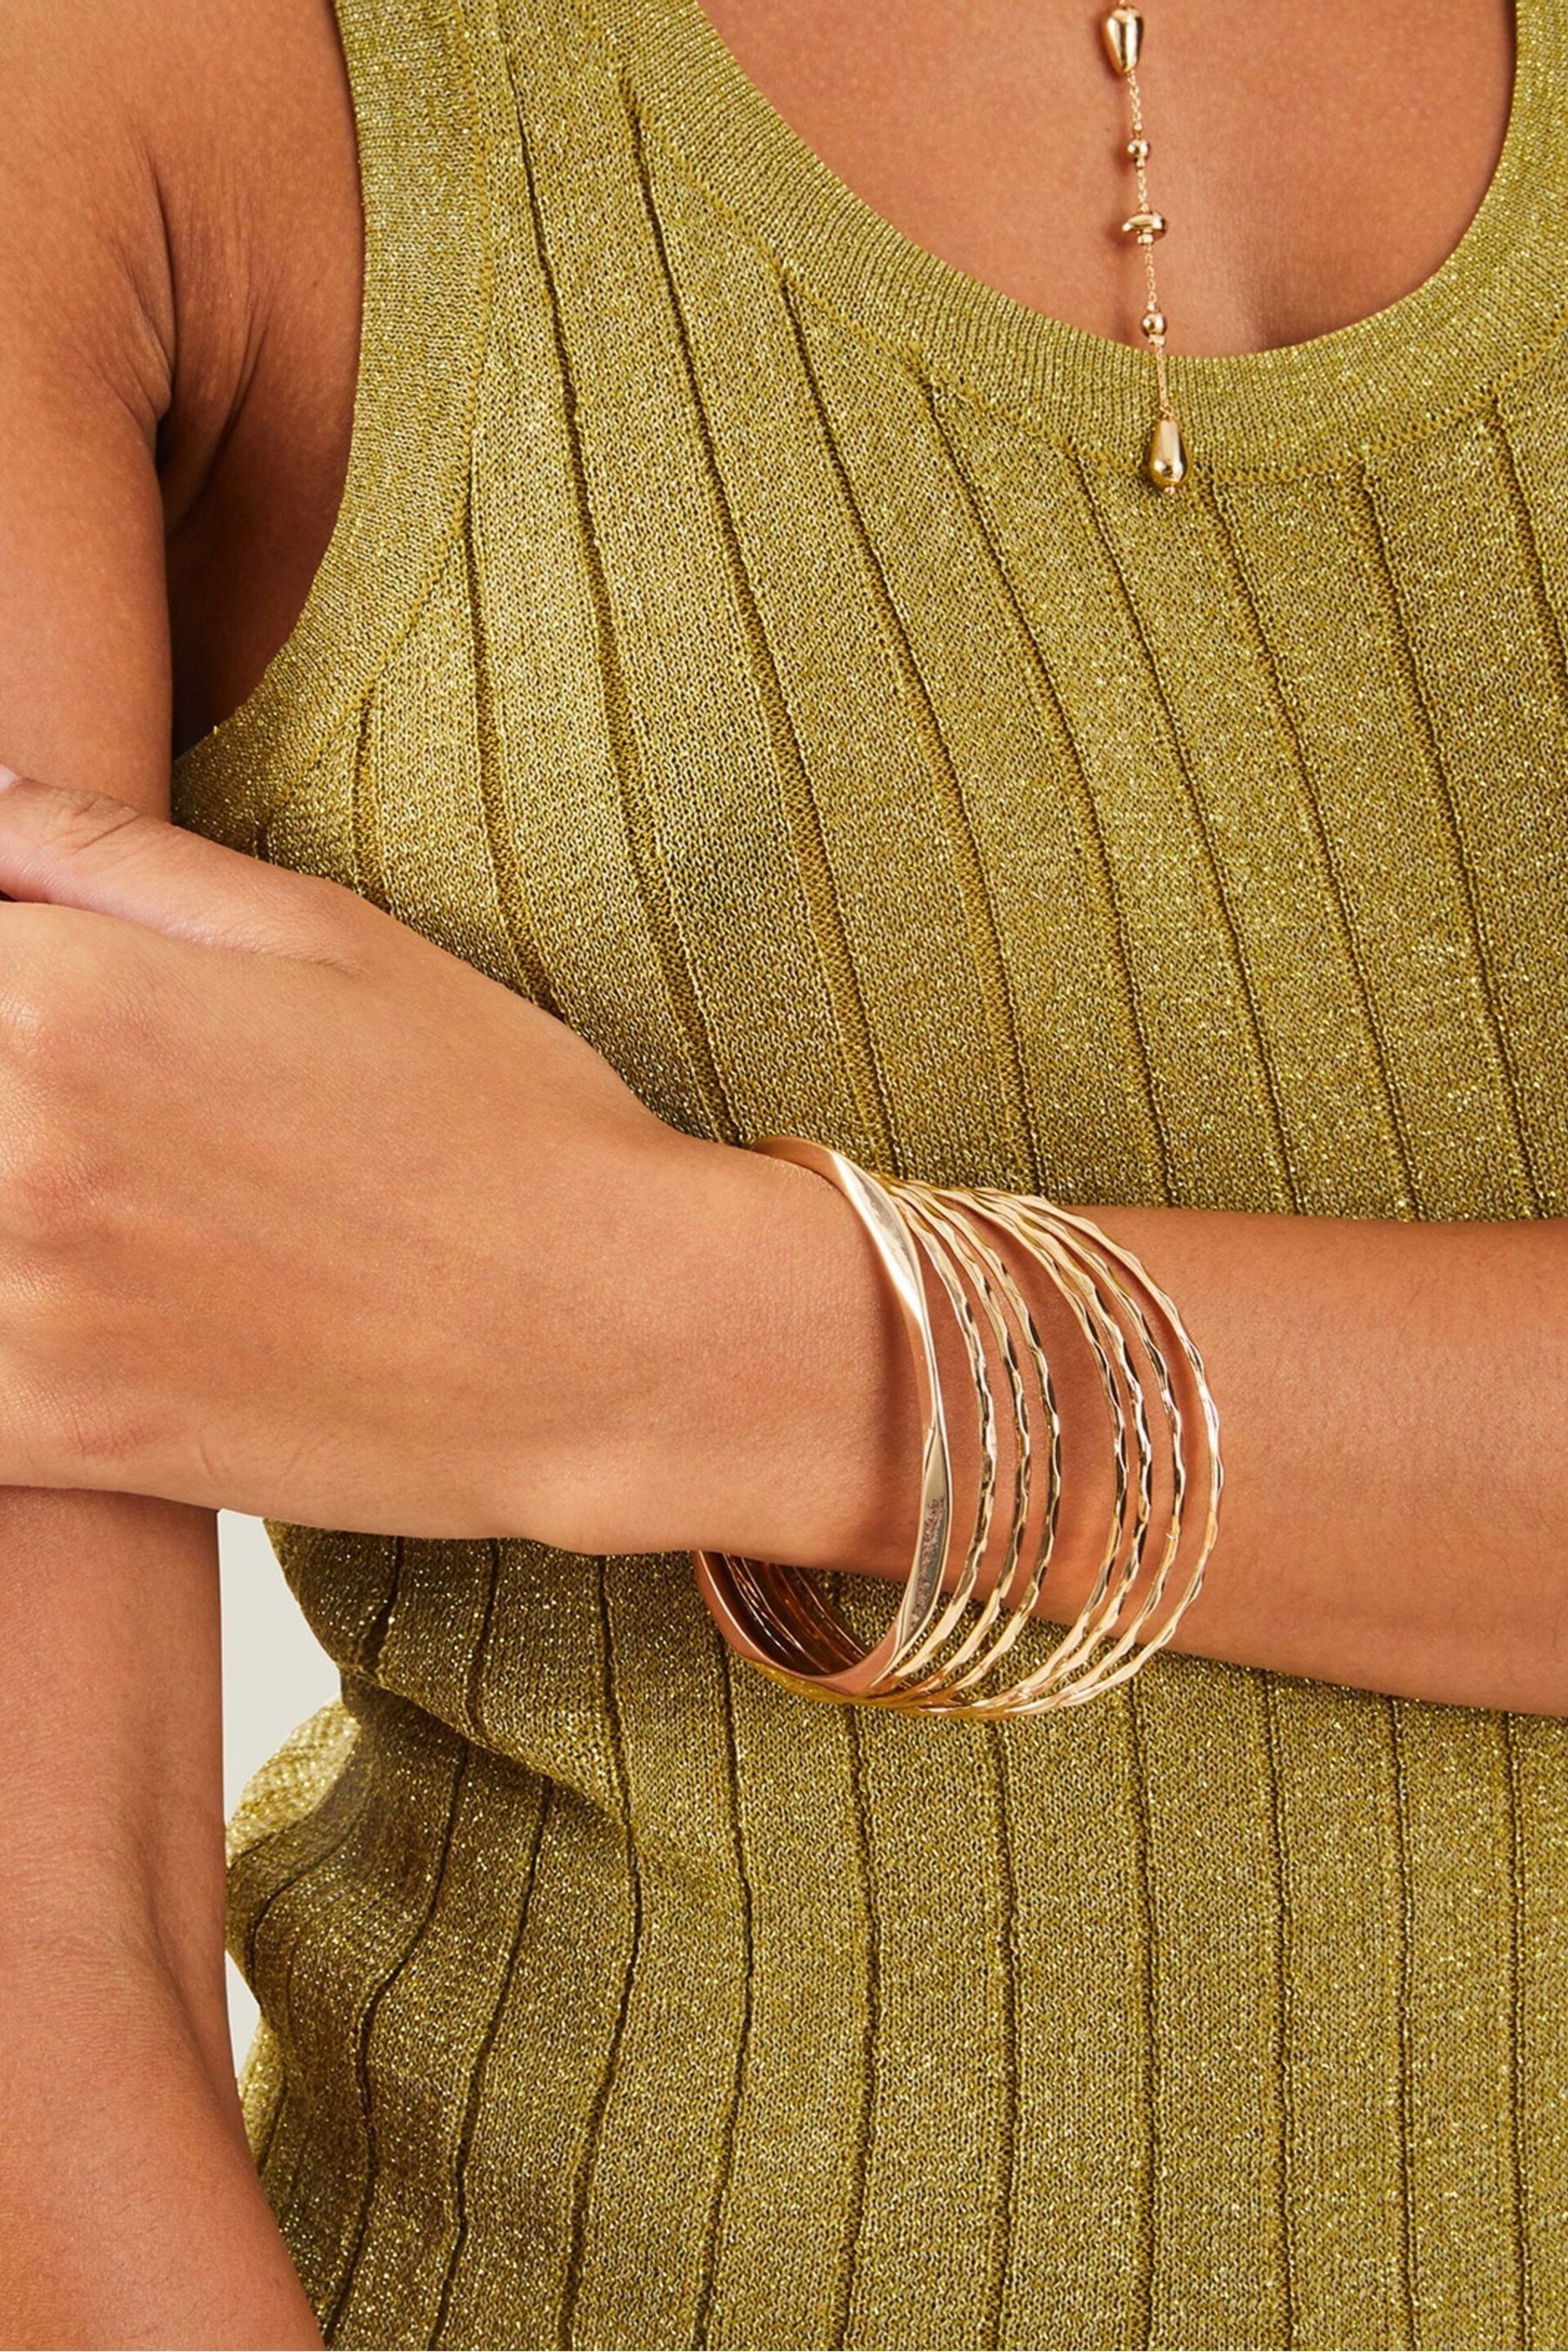 Accessorize Gold Tone Bangles 8 Pack - Image 3 of 3